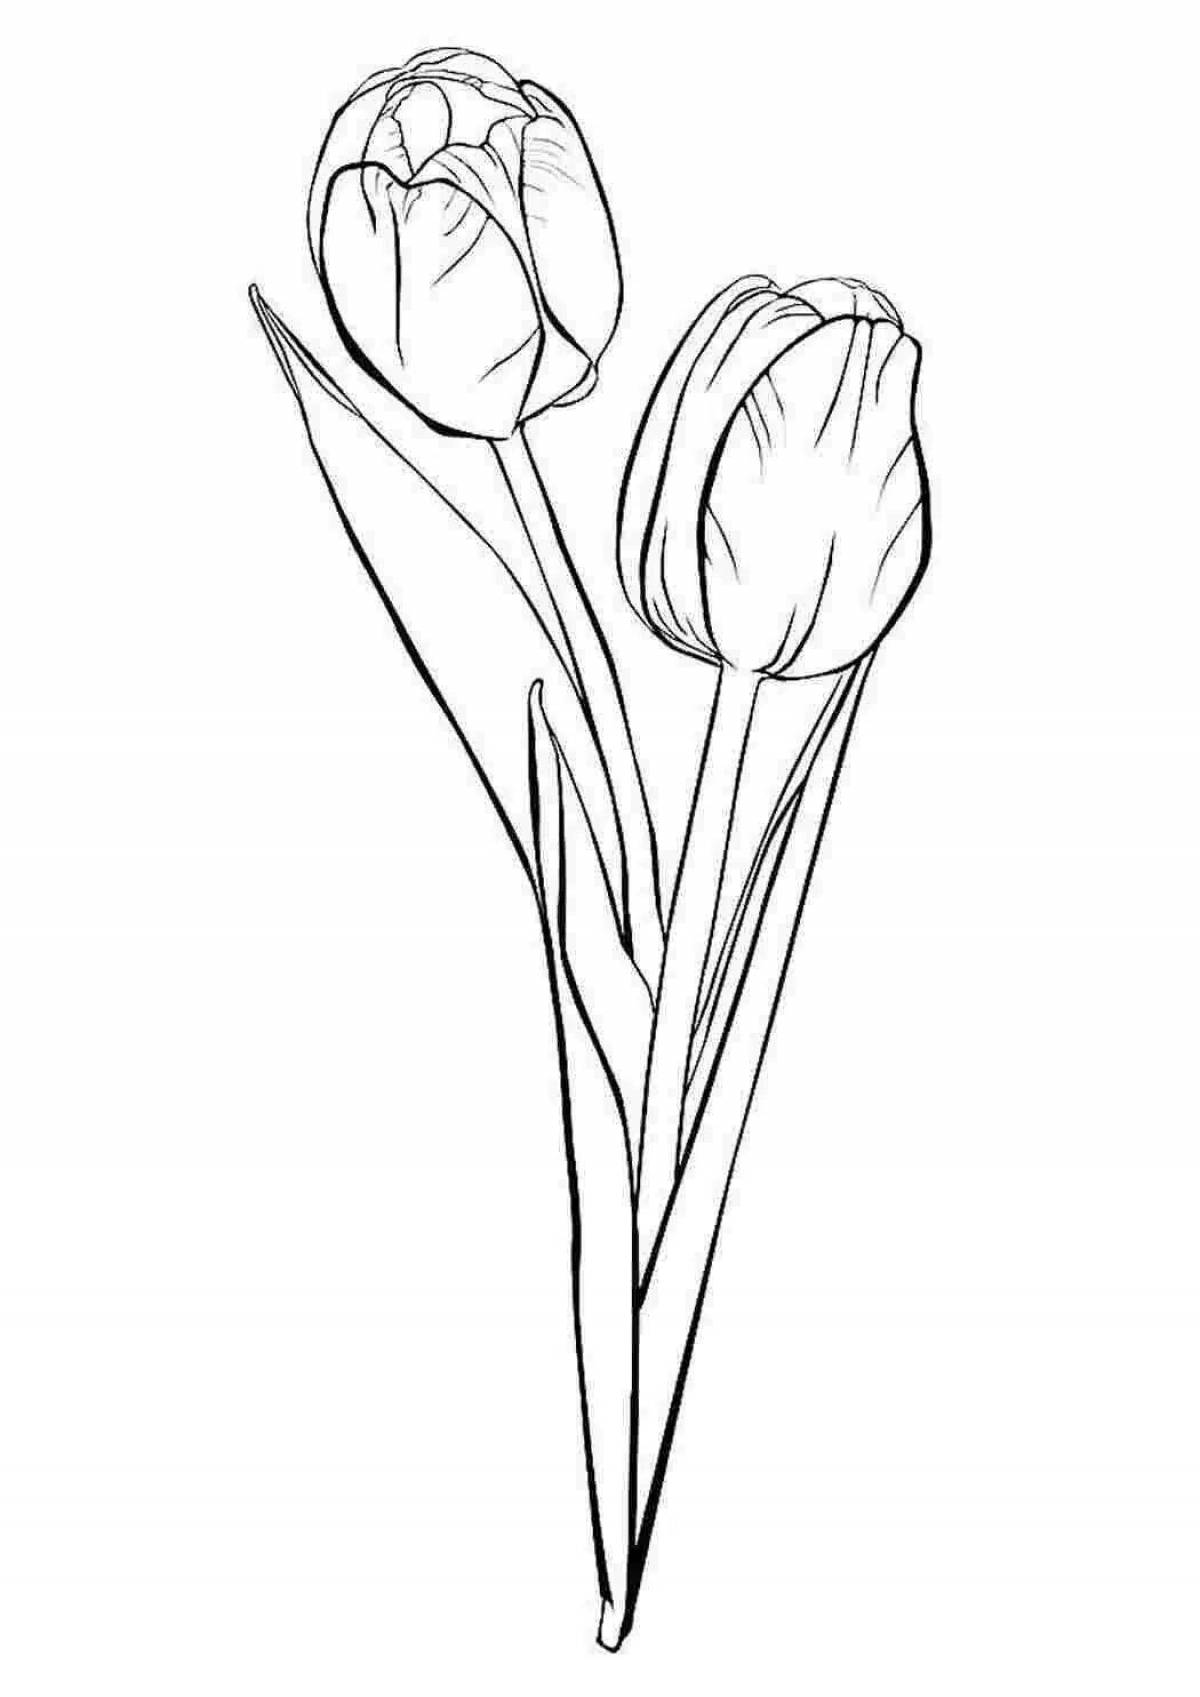 Awesome tulip coloring page